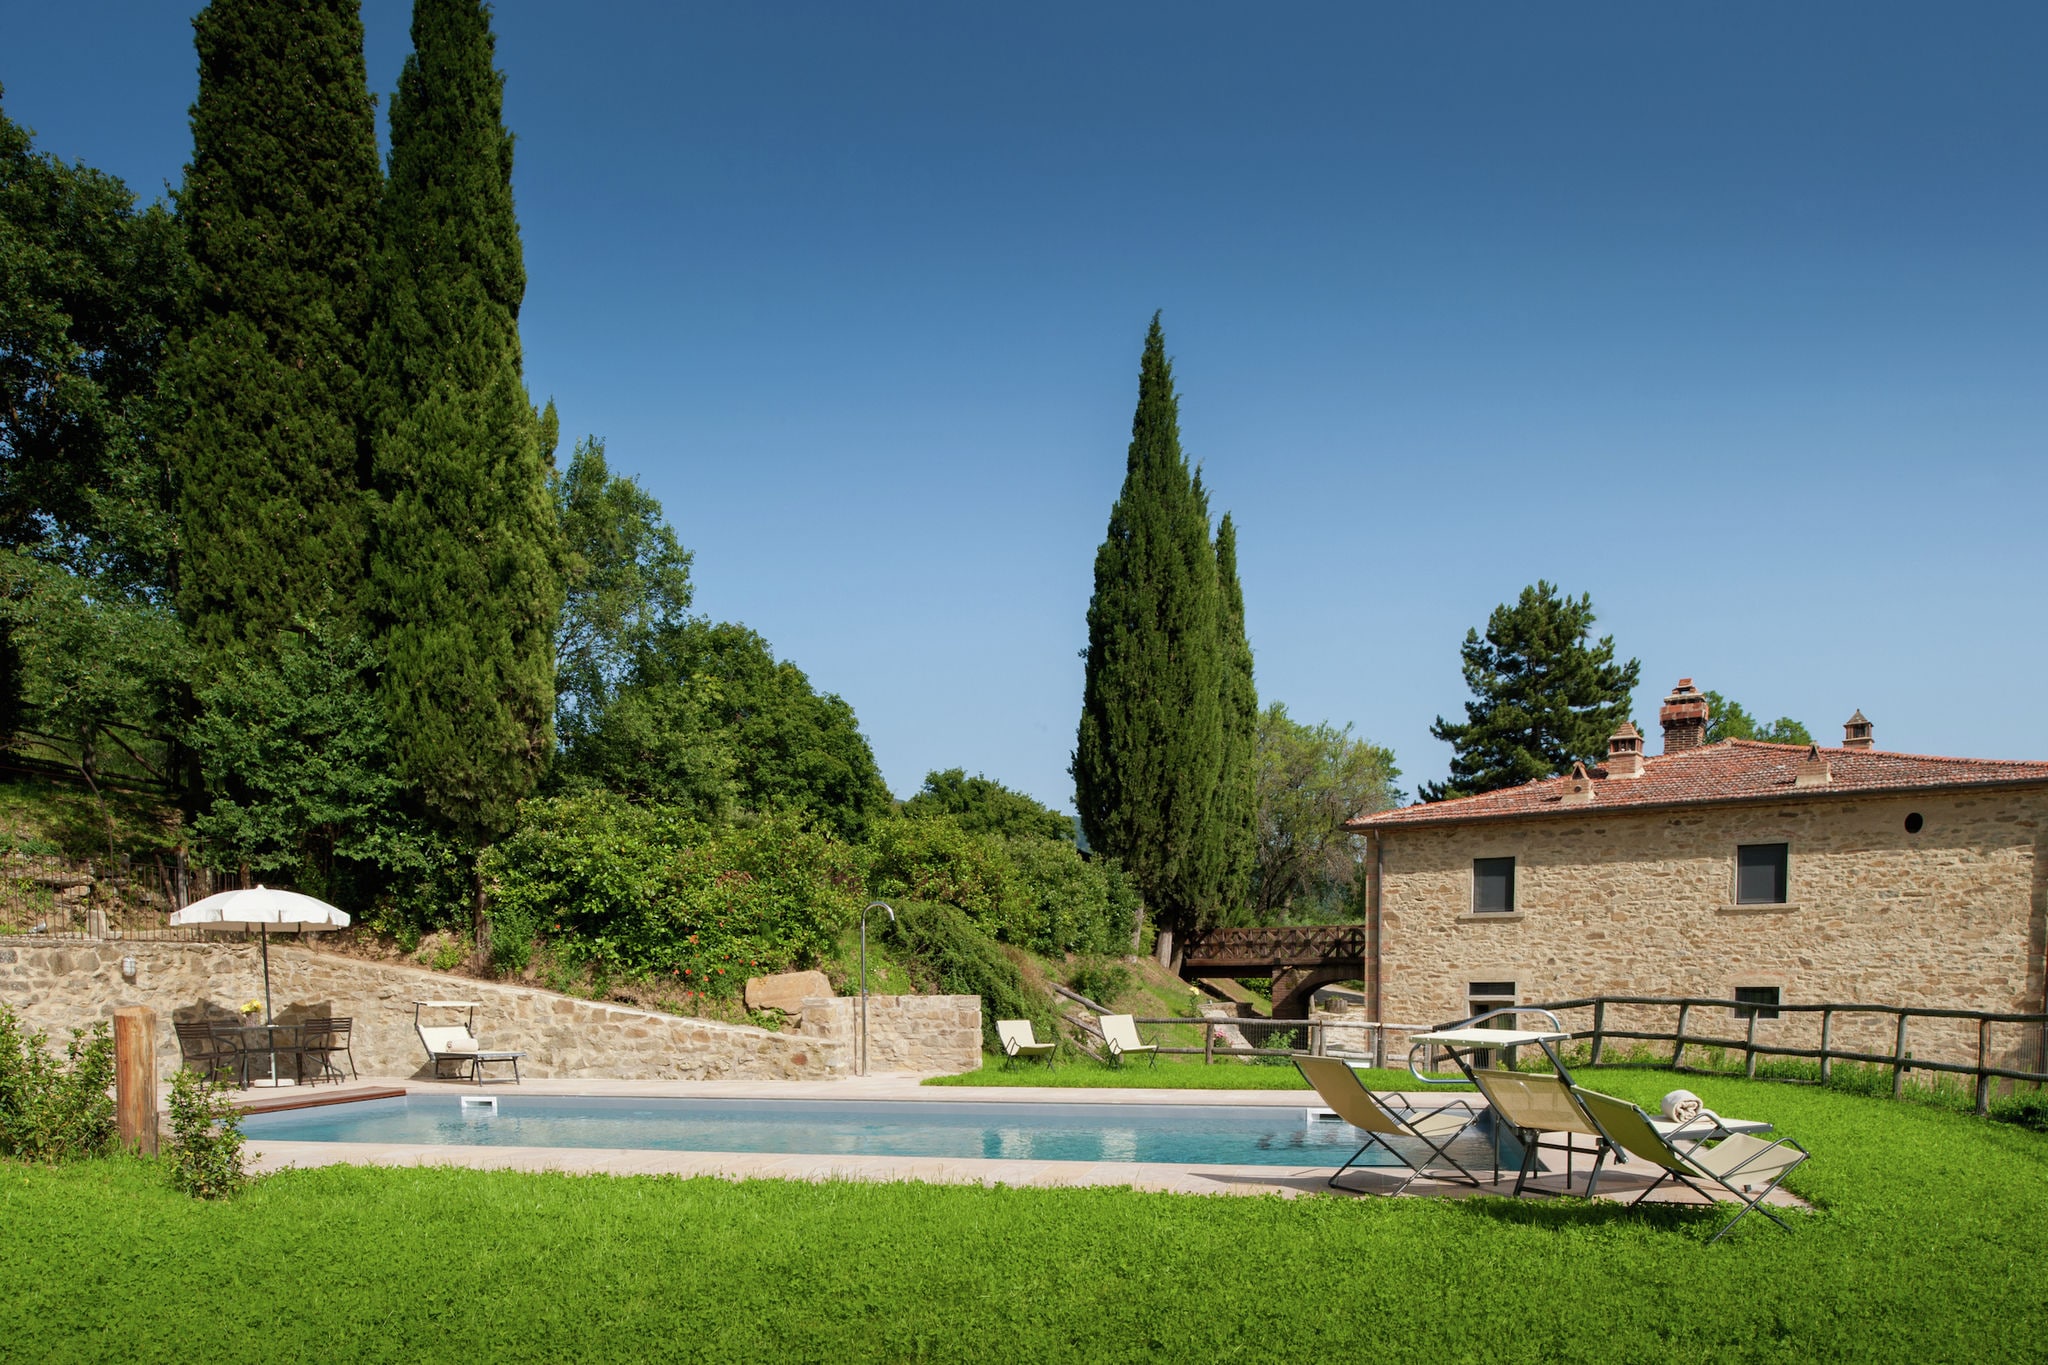 Villa with private pool on an organic wine estate